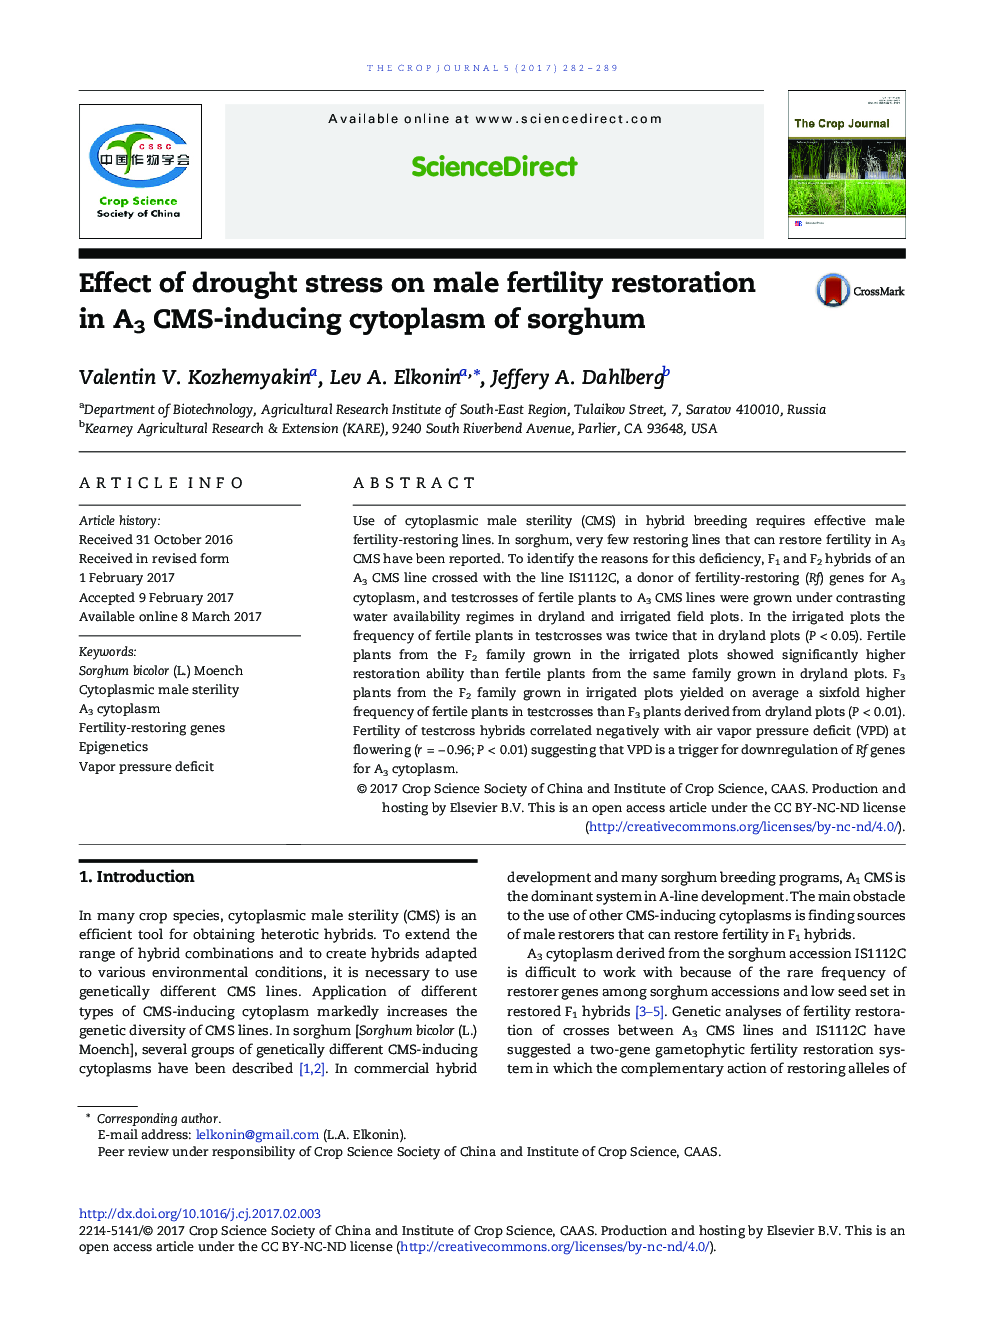 Effect of drought stress on male fertility restoration in A3 CMS-inducing cytoplasm of sorghum